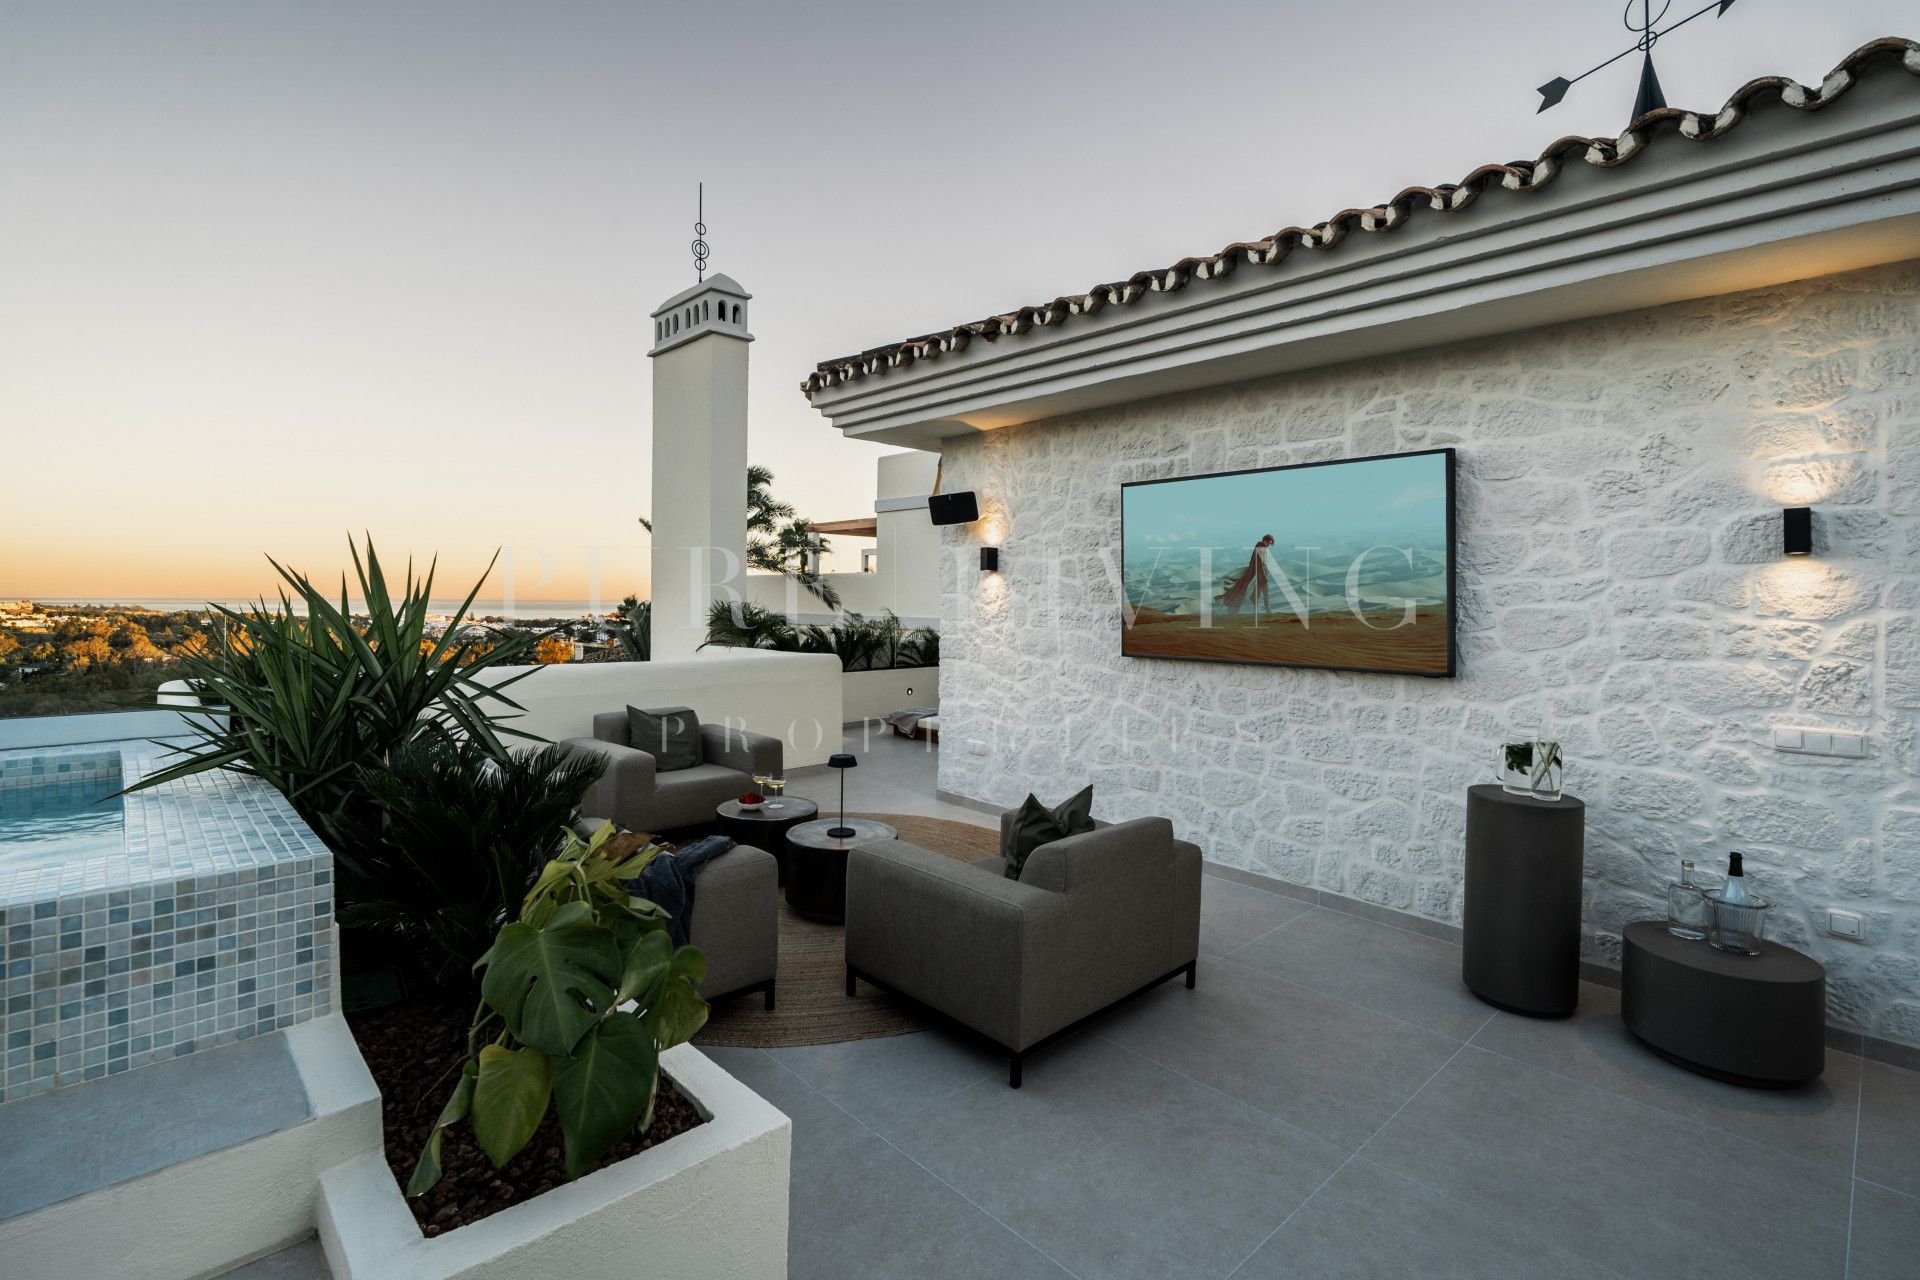 Outstanding duplex penthouse featuring an amazing rooftop terrace with sea and mountain views